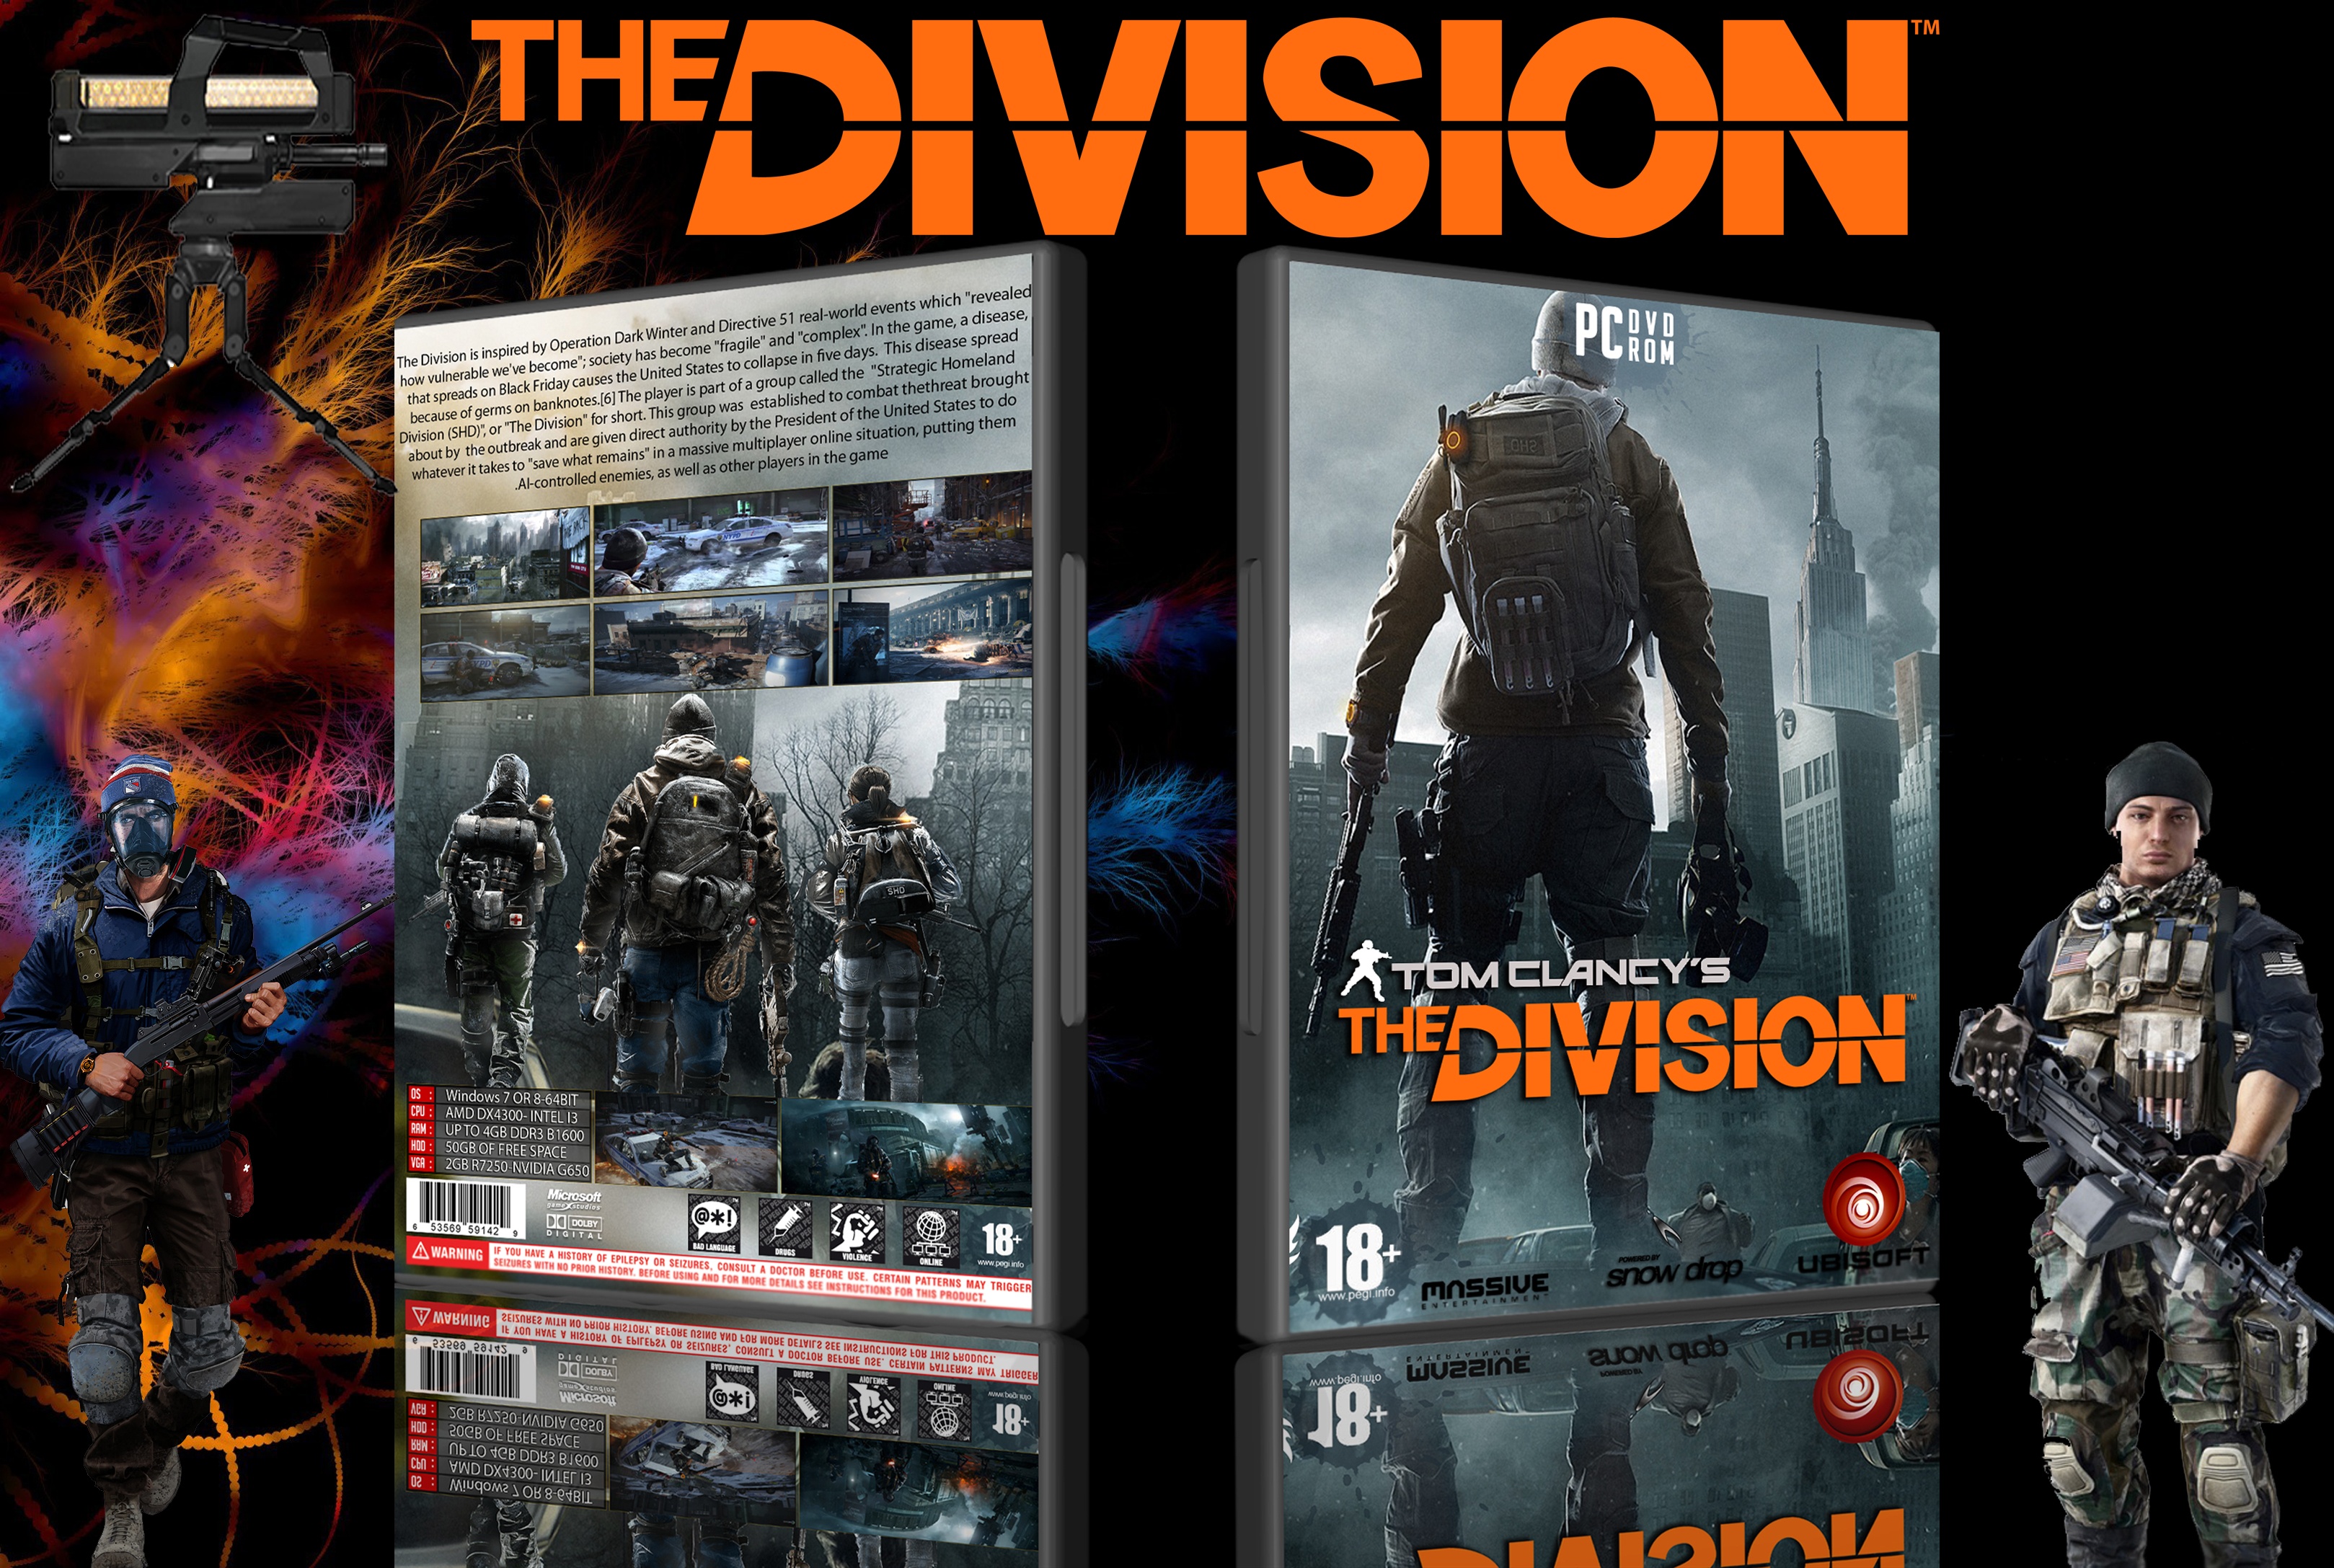 Tom Clancy's: The Division box cover